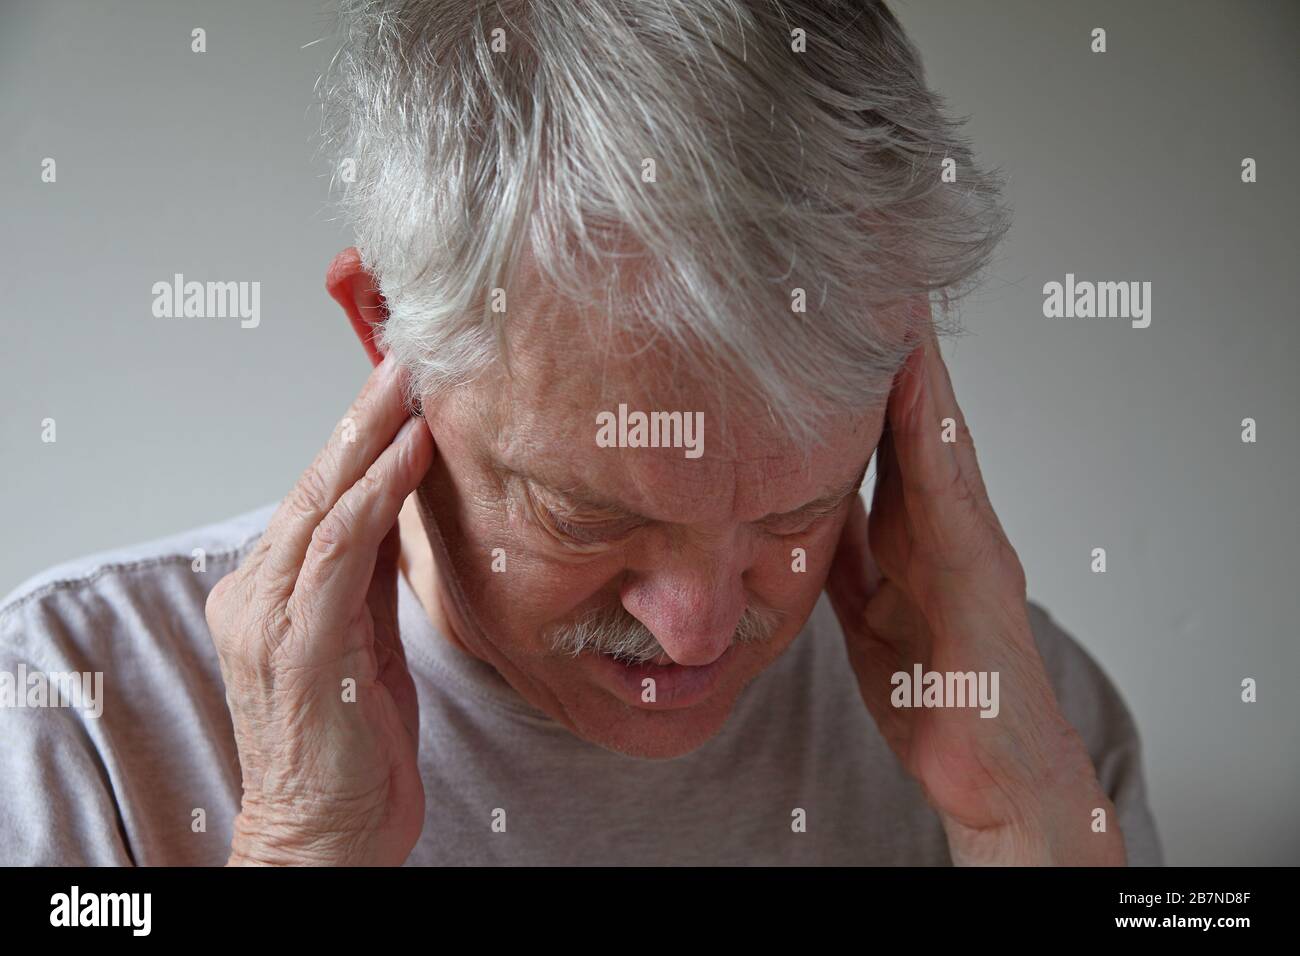 Older man with hands on head looking down Stock Photo